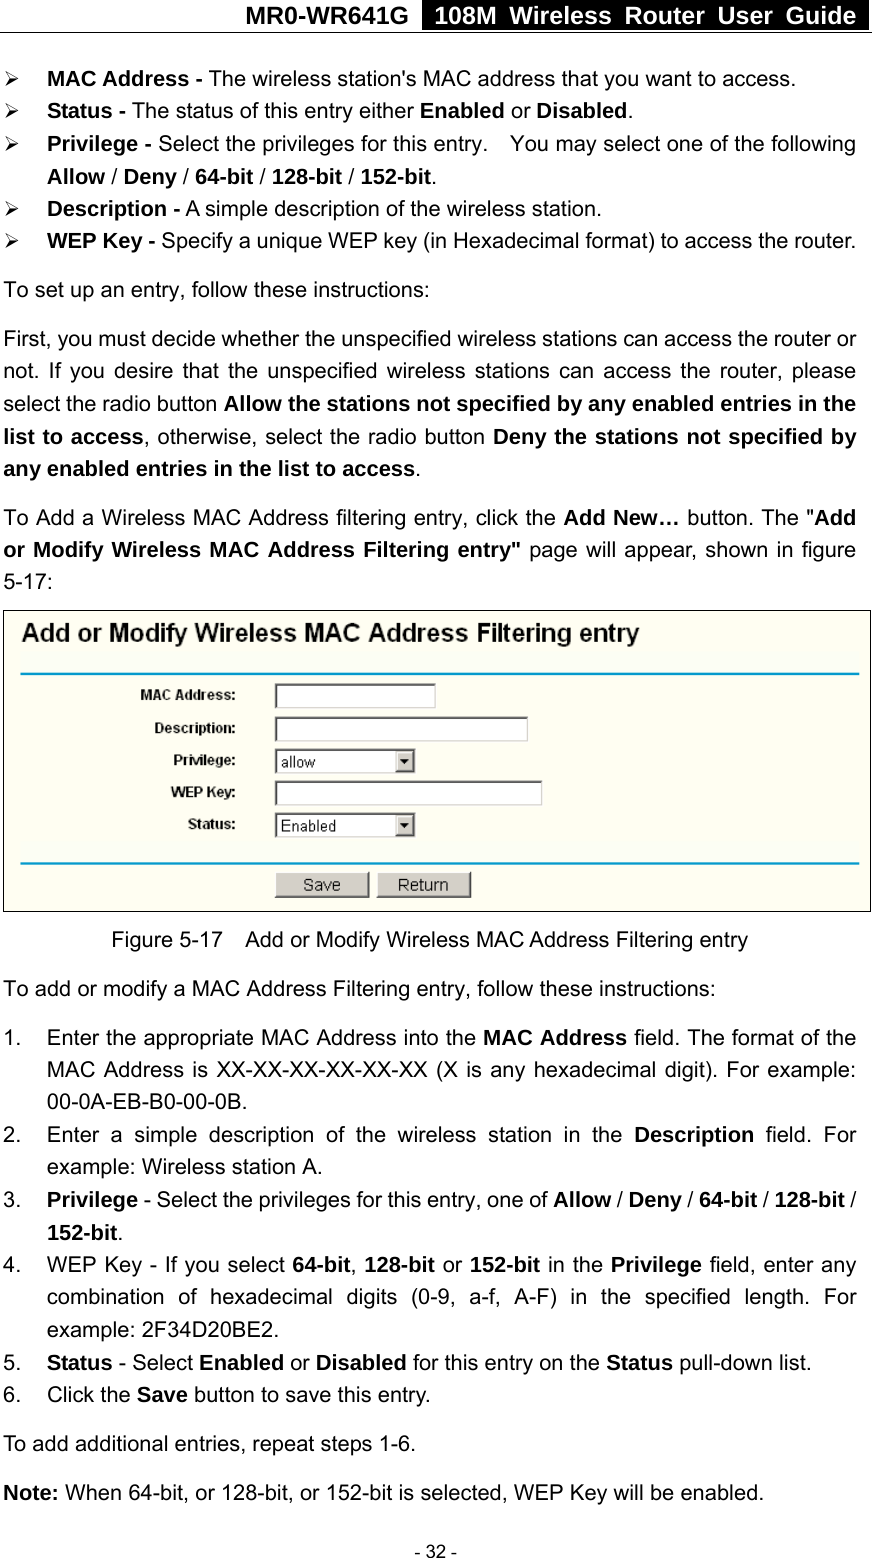 MR0-WR641G   108M Wireless Router User Guide  ¾ MAC Address - The wireless station&apos;s MAC address that you want to access.   ¾ Status - The status of this entry either Enabled or Disabled. ¾ Privilege - Select the privileges for this entry.    You may select one of the following Allow / Deny / 64-bit / 128-bit / 152-bit.  ¾ Description - A simple description of the wireless station.   ¾ WEP Key - Specify a unique WEP key (in Hexadecimal format) to access the router.   To set up an entry, follow these instructions:   First, you must decide whether the unspecified wireless stations can access the router or not. If you desire that the unspecified wireless stations can access the router, please select the radio button Allow the stations not specified by any enabled entries in the list to access, otherwise, select the radio button Deny the stations not specified by any enabled entries in the list to access. To Add a Wireless MAC Address filtering entry, click the Add New… button. The &quot;Add or Modify Wireless MAC Address Filtering entry&quot; page will appear, shown in figure 5-17:  Figure 5-17    Add or Modify Wireless MAC Address Filtering entry To add or modify a MAC Address Filtering entry, follow these instructions: 1.  Enter the appropriate MAC Address into the MAC Address field. The format of the MAC Address is XX-XX-XX-XX-XX-XX (X is any hexadecimal digit). For example: 00-0A-EB-B0-00-0B.  2.  Enter a simple description of the wireless station in the Description field. For example: Wireless station A. 3.  Privilege - Select the privileges for this entry, one of Allow / Deny / 64-bit / 128-bit / 152-bit.  4.  WEP Key - If you select 64-bit, 128-bit or 152-bit in the Privilege field, enter any combination of hexadecimal digits (0-9, a-f, A-F) in the specified length. For example: 2F34D20BE2.   5.  Status - Select Enabled or Disabled for this entry on the Status pull-down list. 6. Click the Save button to save this entry. To add additional entries, repeat steps 1-6. Note: When 64-bit, or 128-bit, or 152-bit is selected, WEP Key will be enabled.    - 32 - 